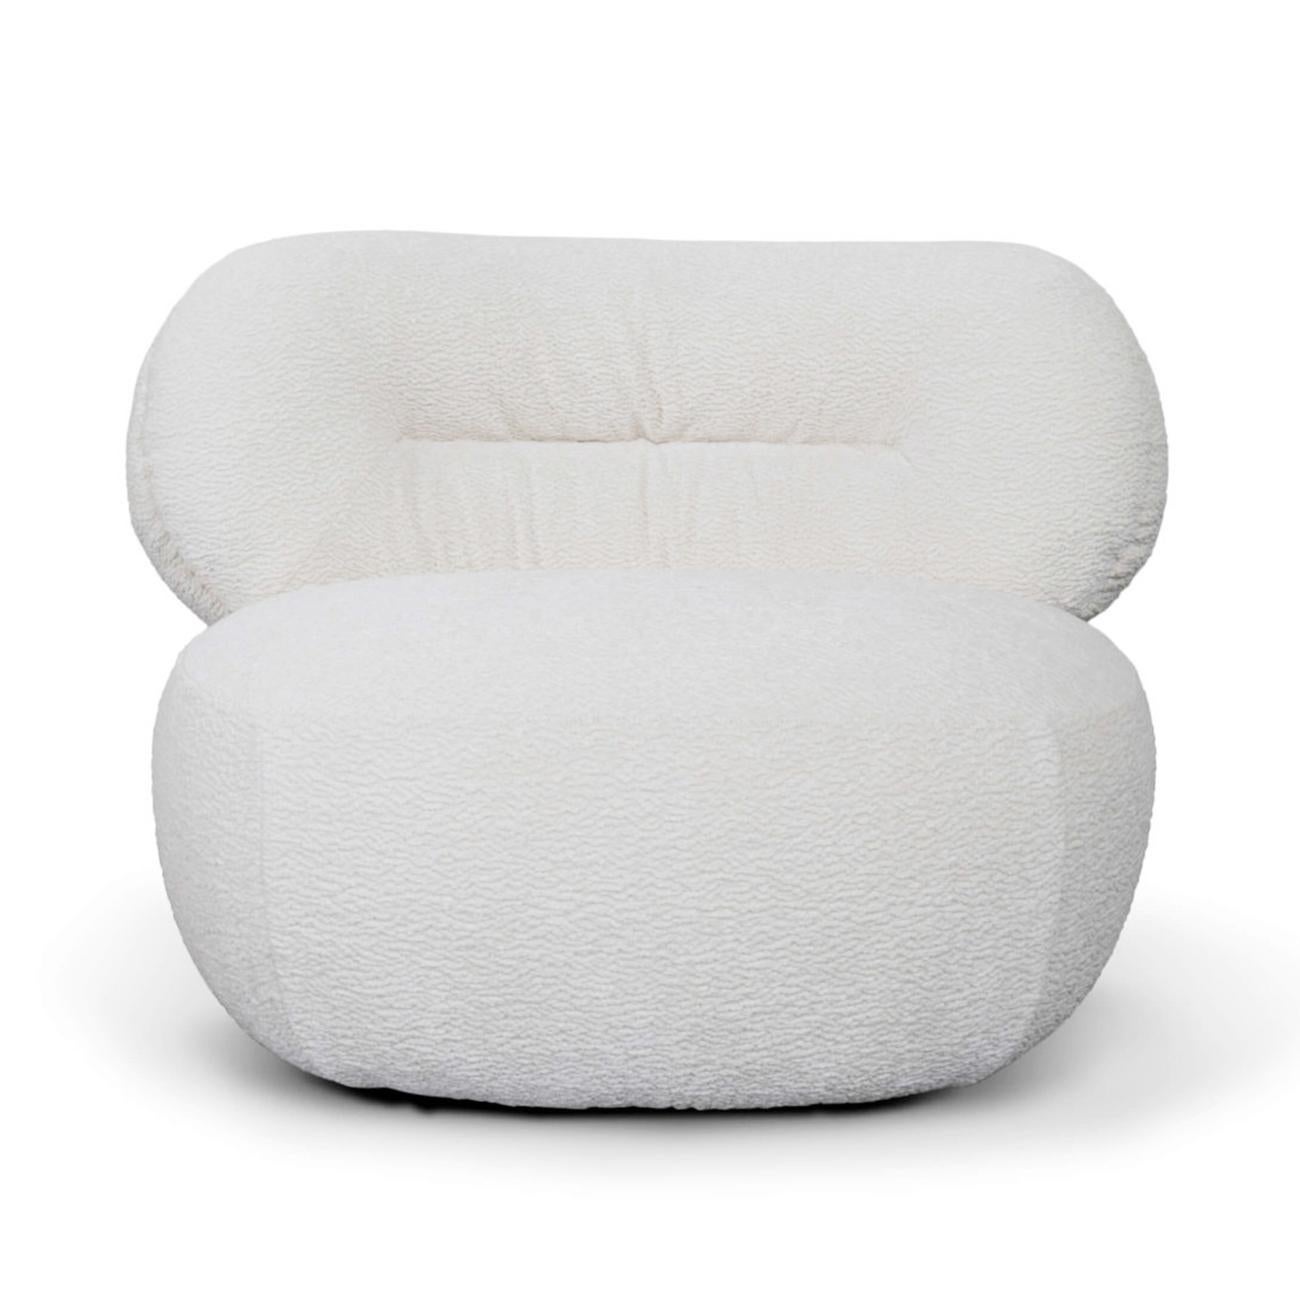 Armchair fleecy lounge with wooden structure,
upholstered with foam and covered with white 
fluffy fabric.
Available with other fabric on request.